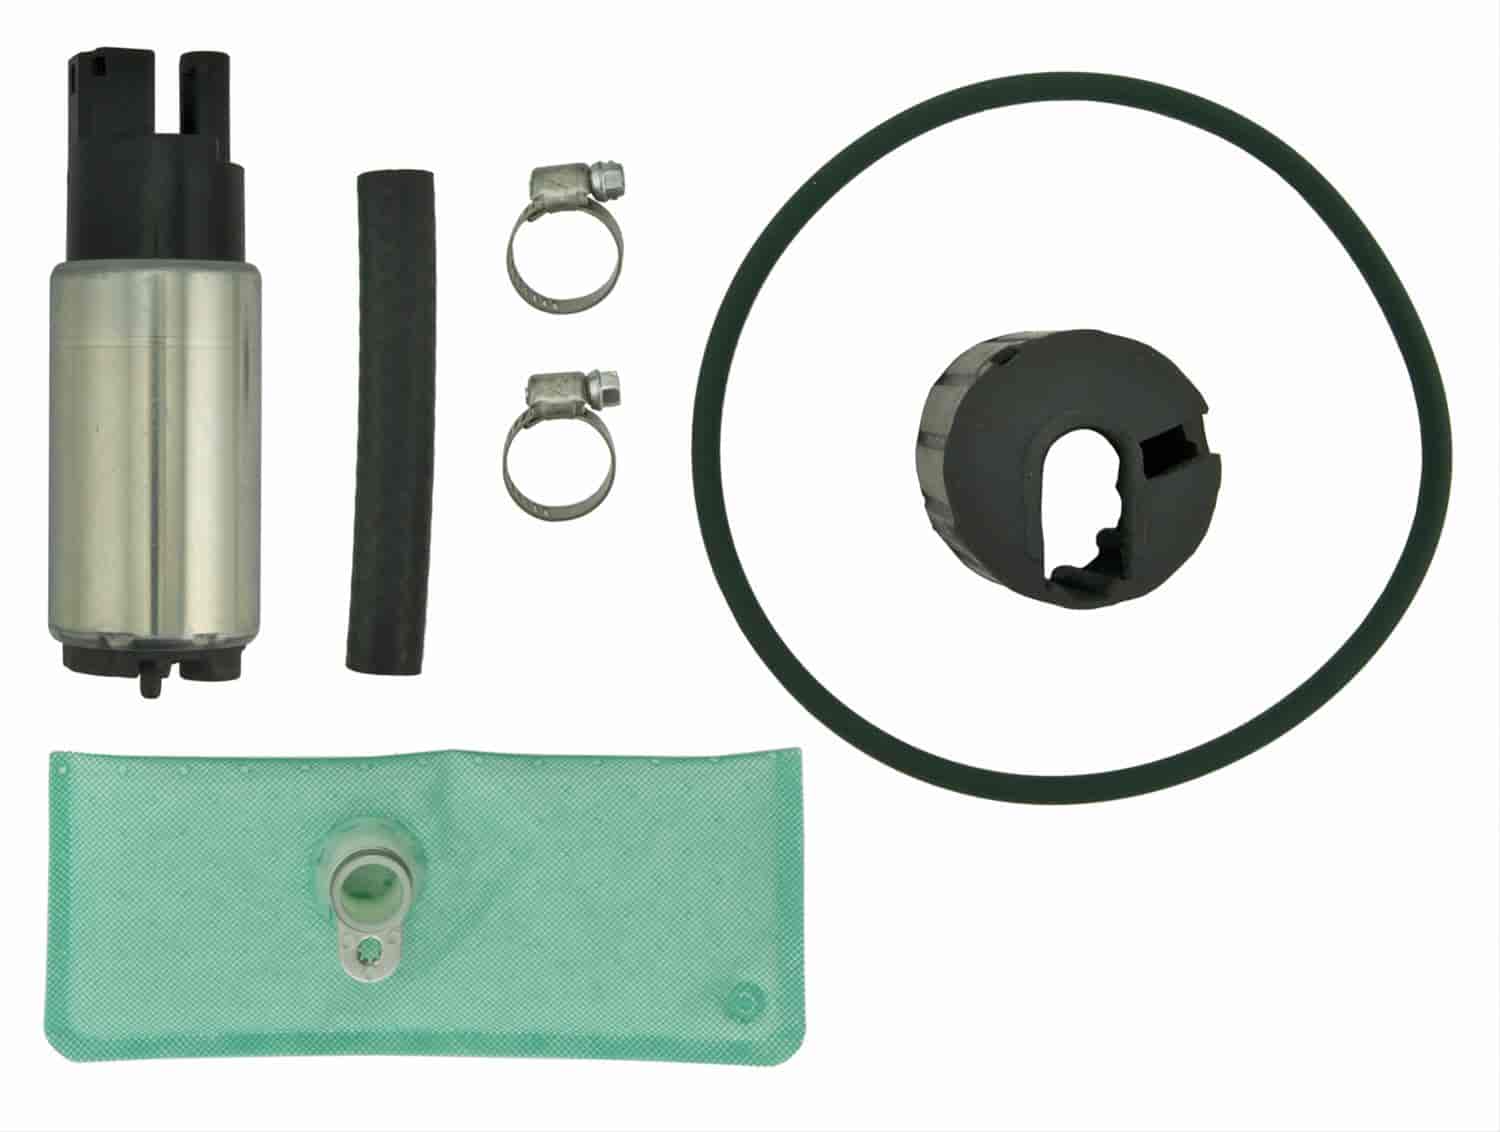 EFI In-Tank Electric Fuel Pump And Strainer Set for 1997-1999 Ford E-150/E-250/E-350